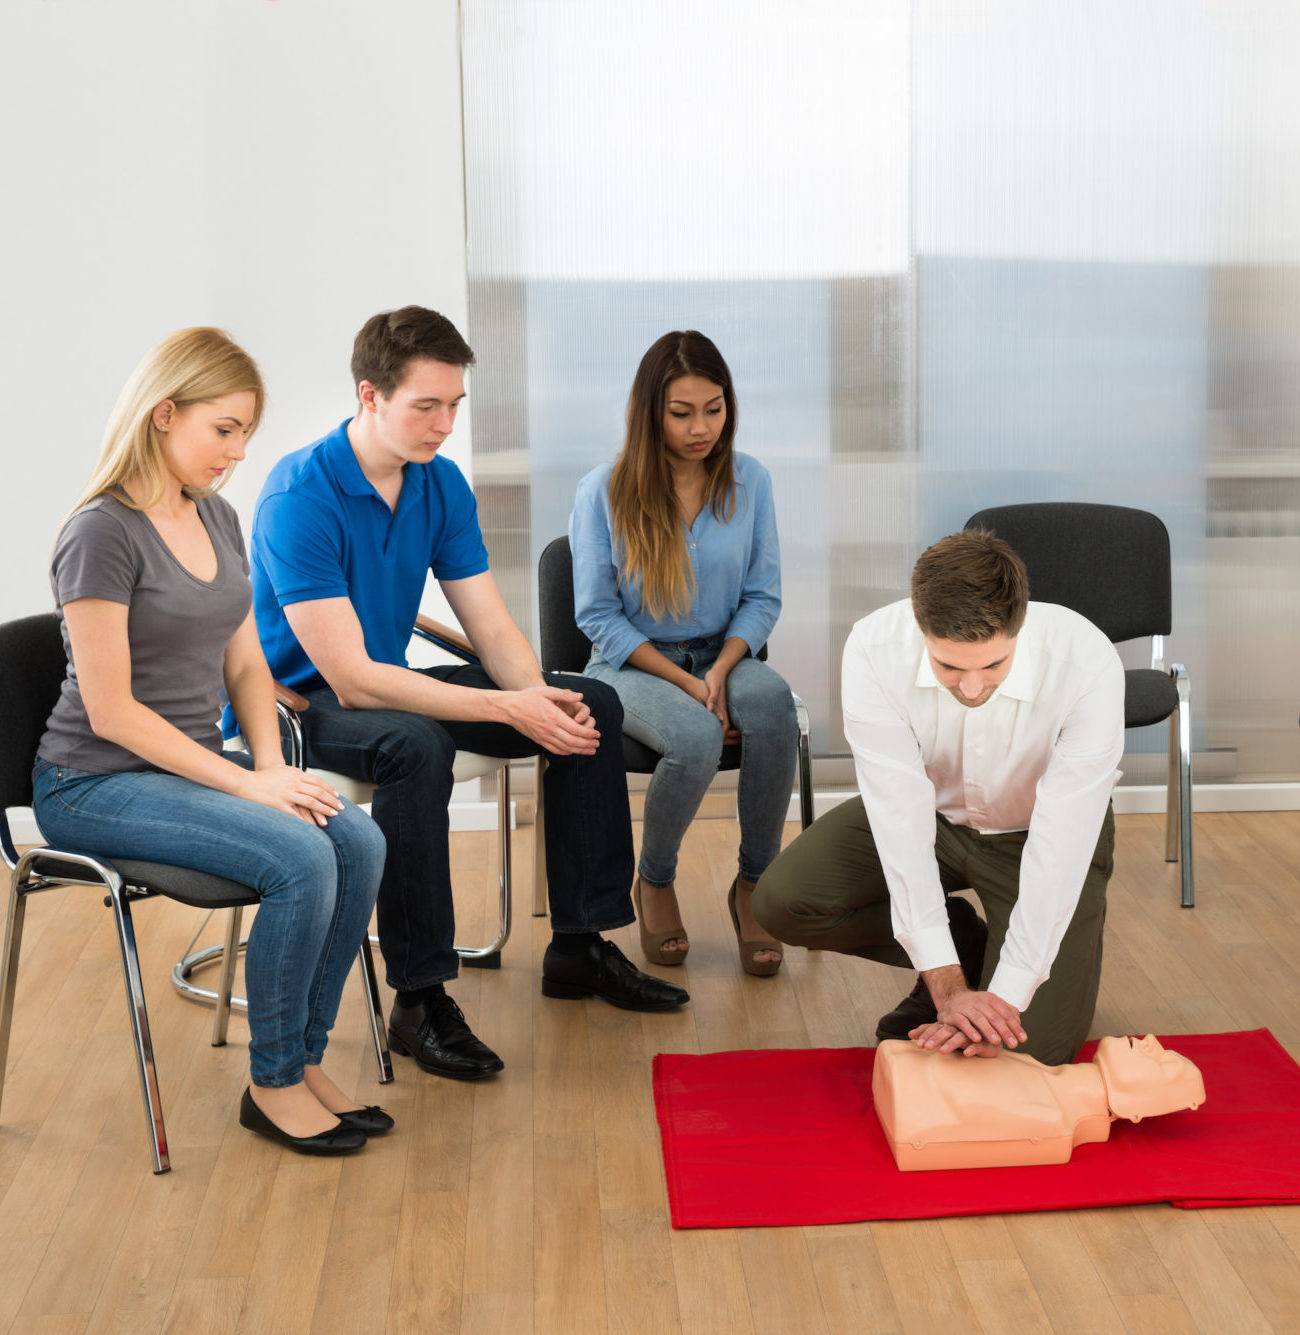 Office worker practices CPR on a manikin.